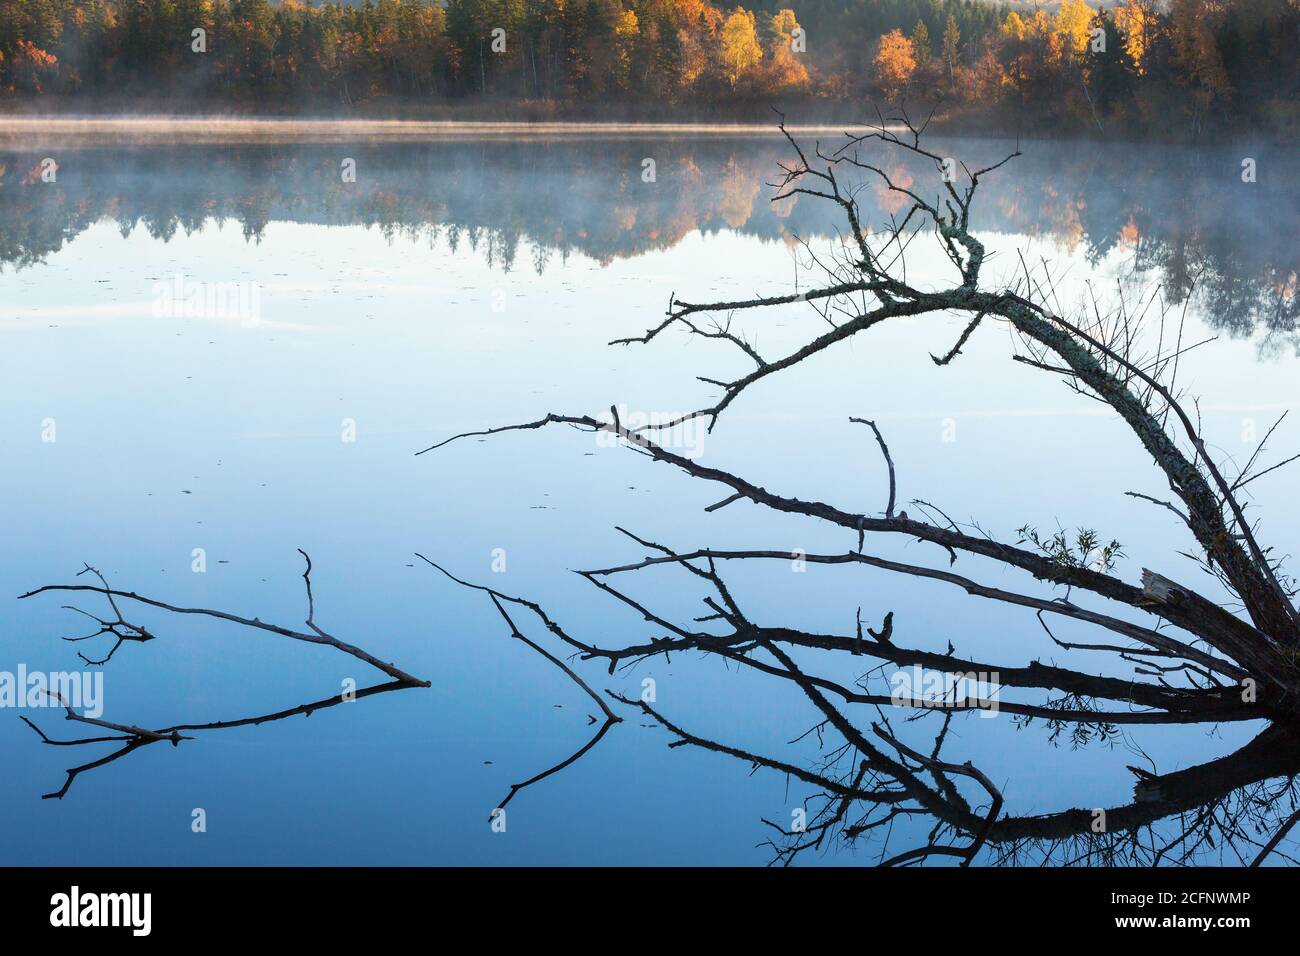 Tree branches in silhouette lying in the water with fog on the lake Stock Photo